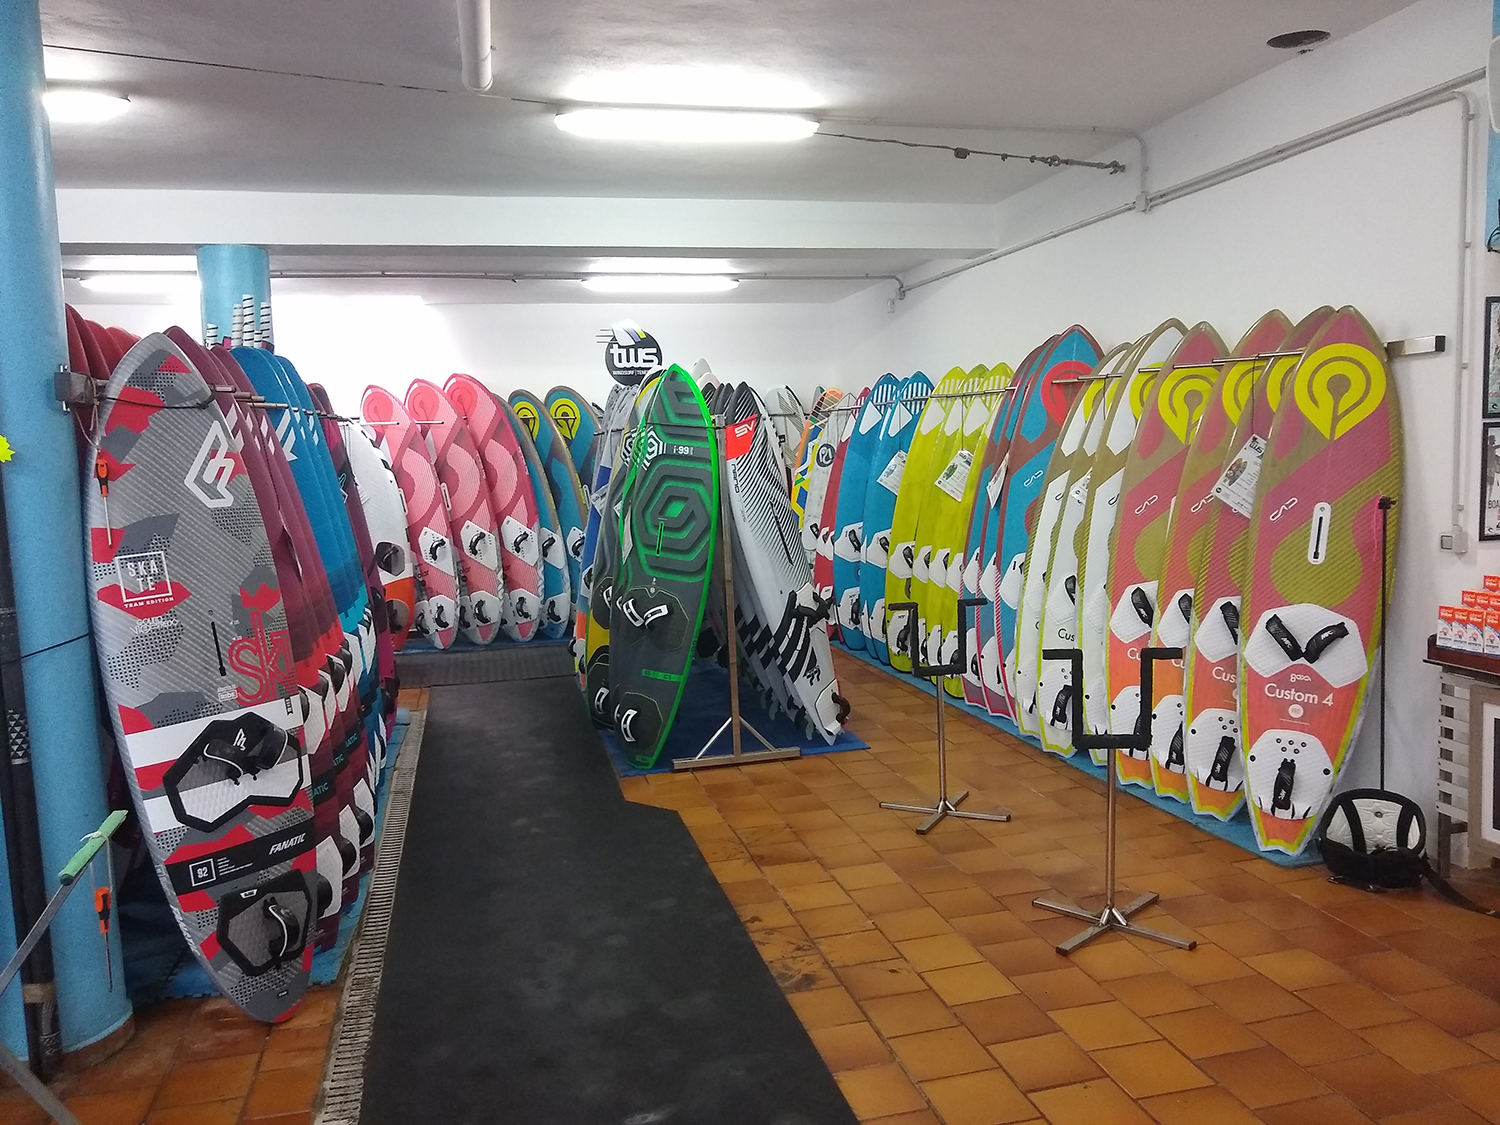 Click to Enlarge - Boards galore to rent!